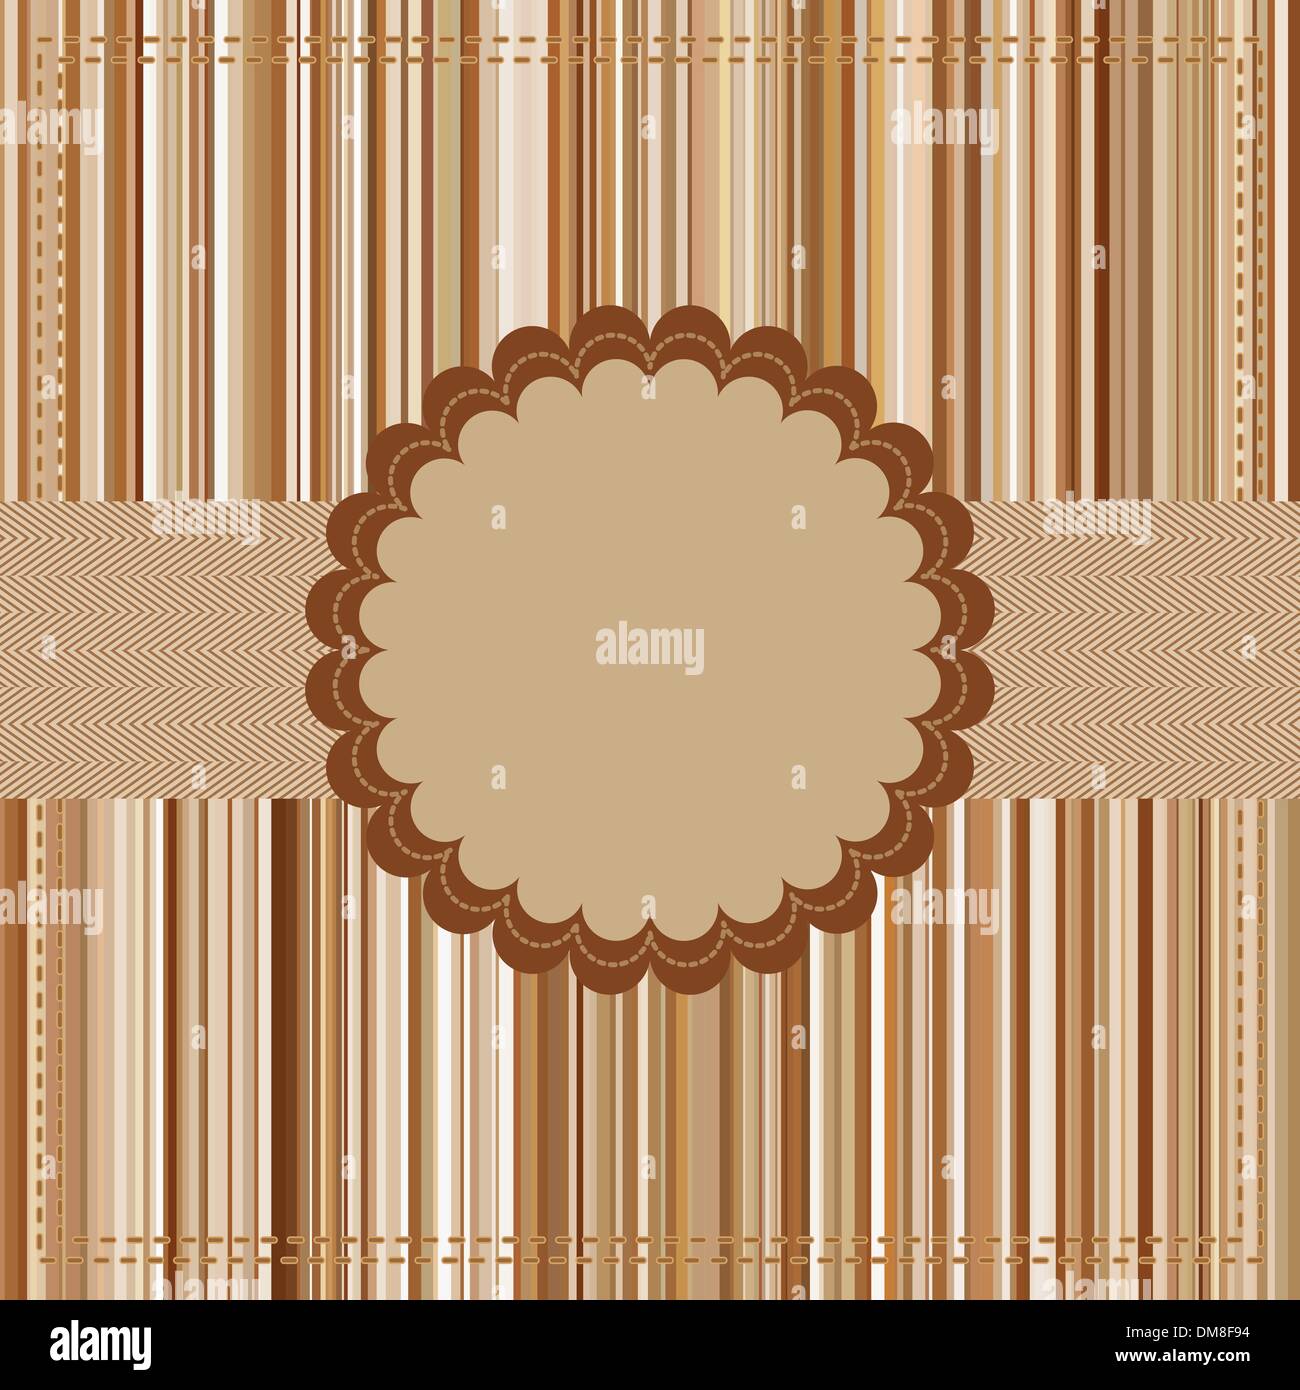 Greeting card template. EPS 8 Stock Vector